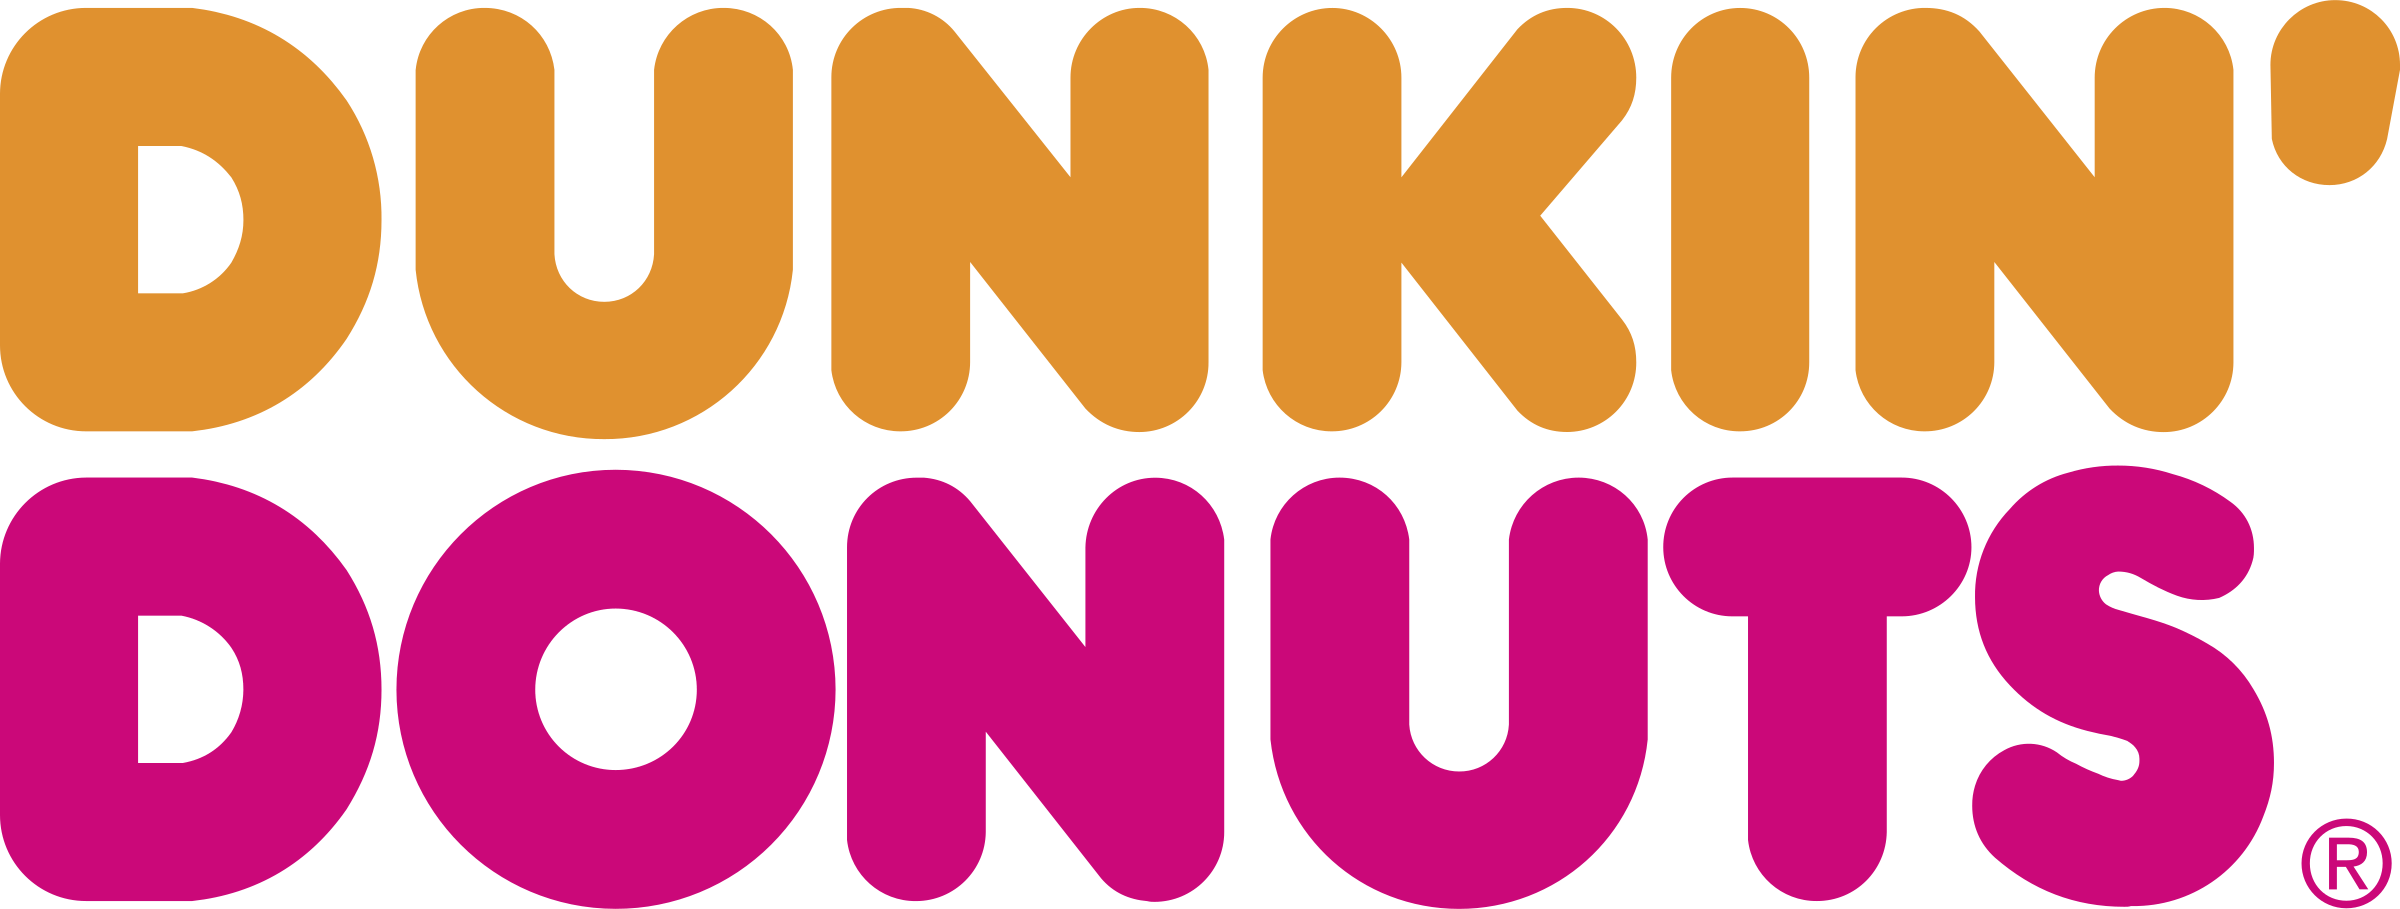 Dunkin Logo - File:Dunkin-donuts-1-logo-png-transparent.png - Wikimedia Commons